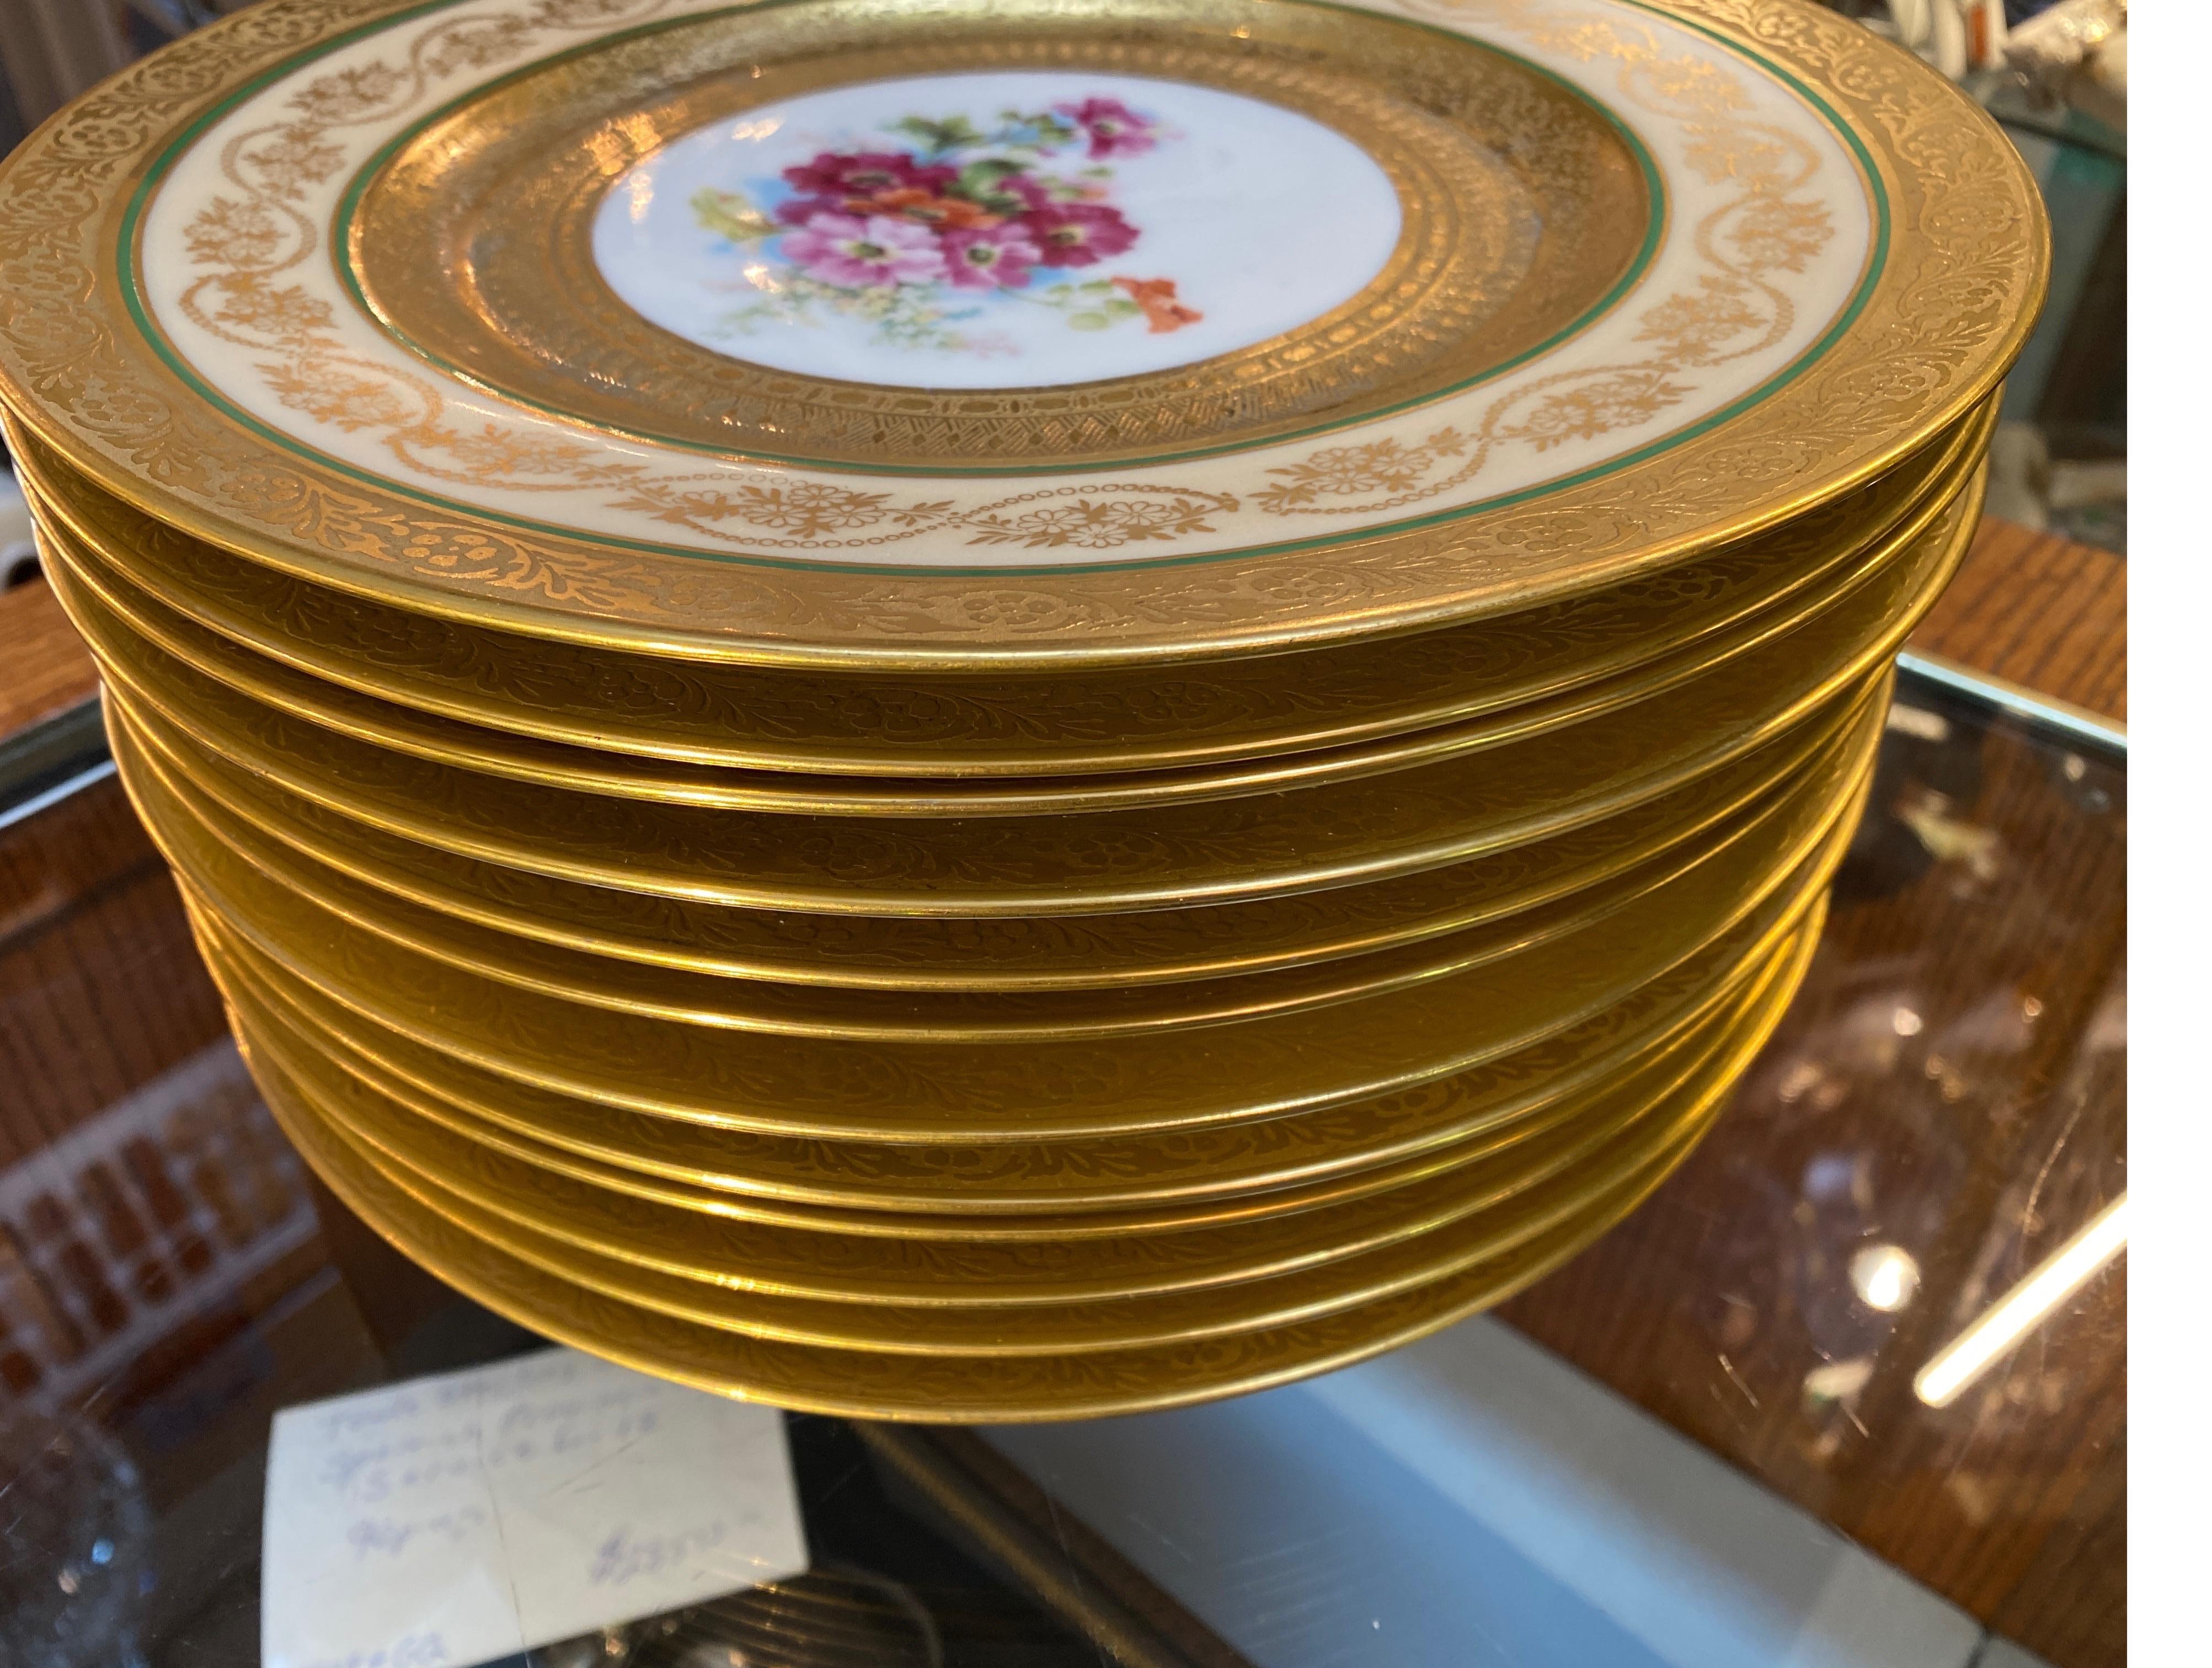 Set of 12 Gold Encrusted Floral Service Dinner Plates, 1920's Germany 2